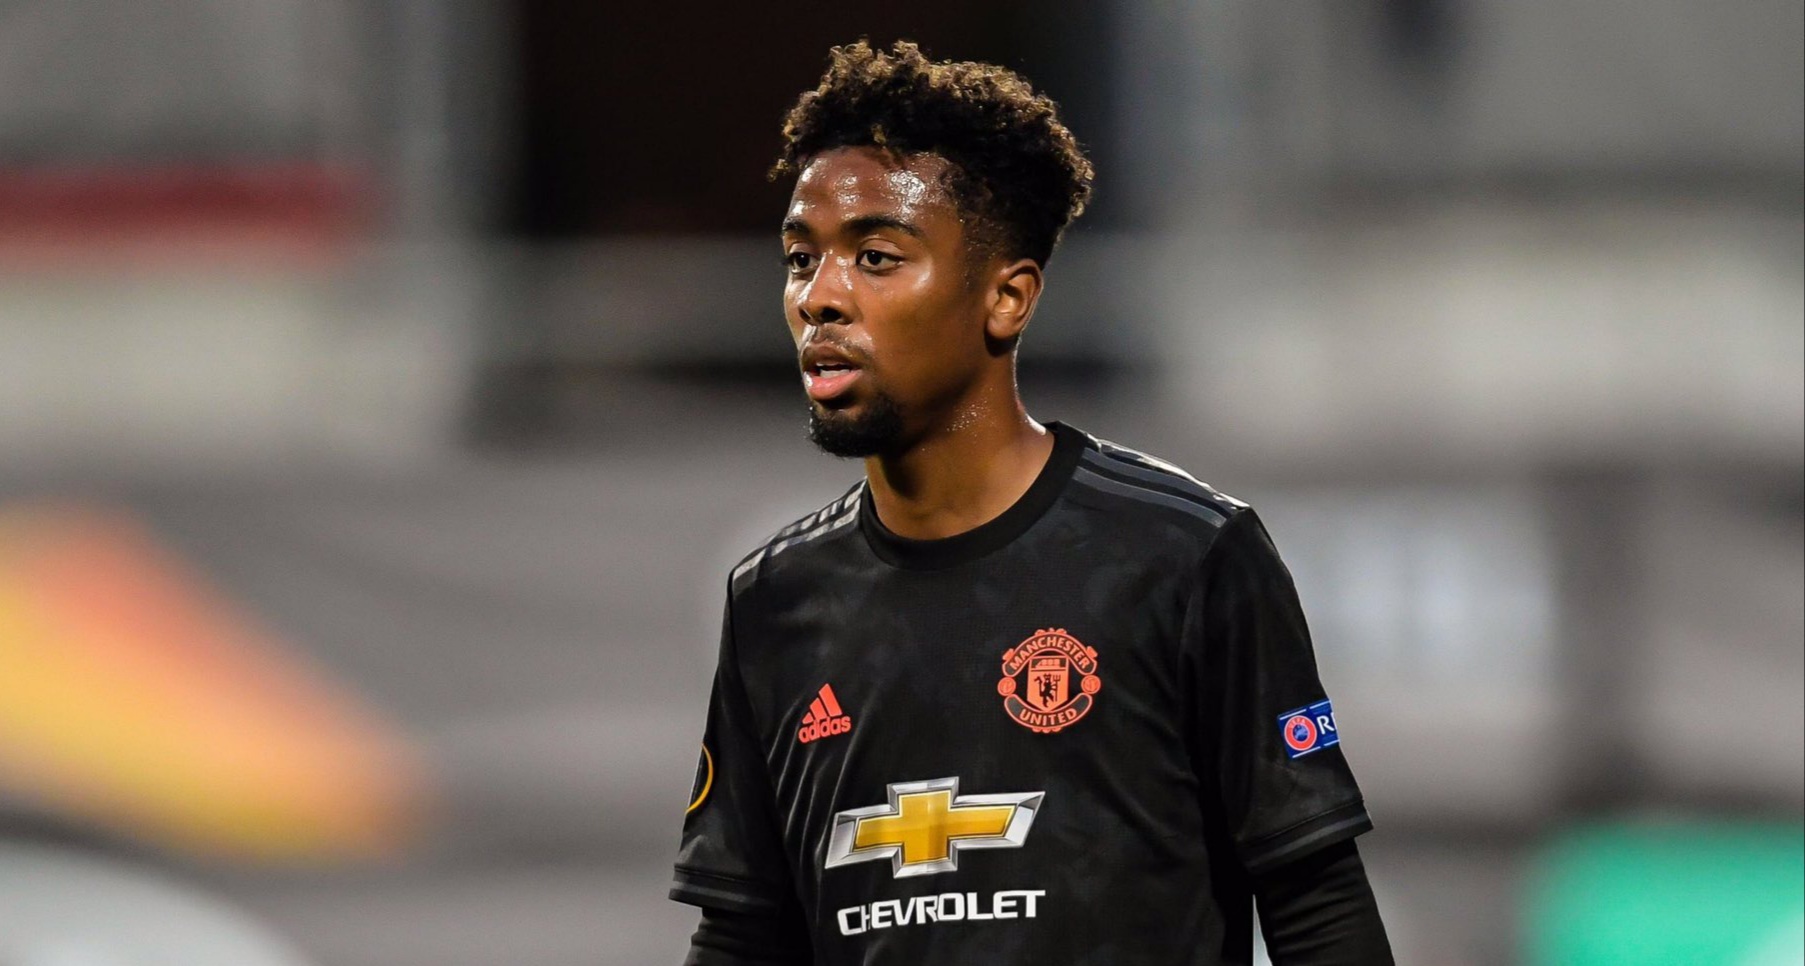 Man Utd to offer Angel Gomes £1.5m deal to ward off Chelsea interest